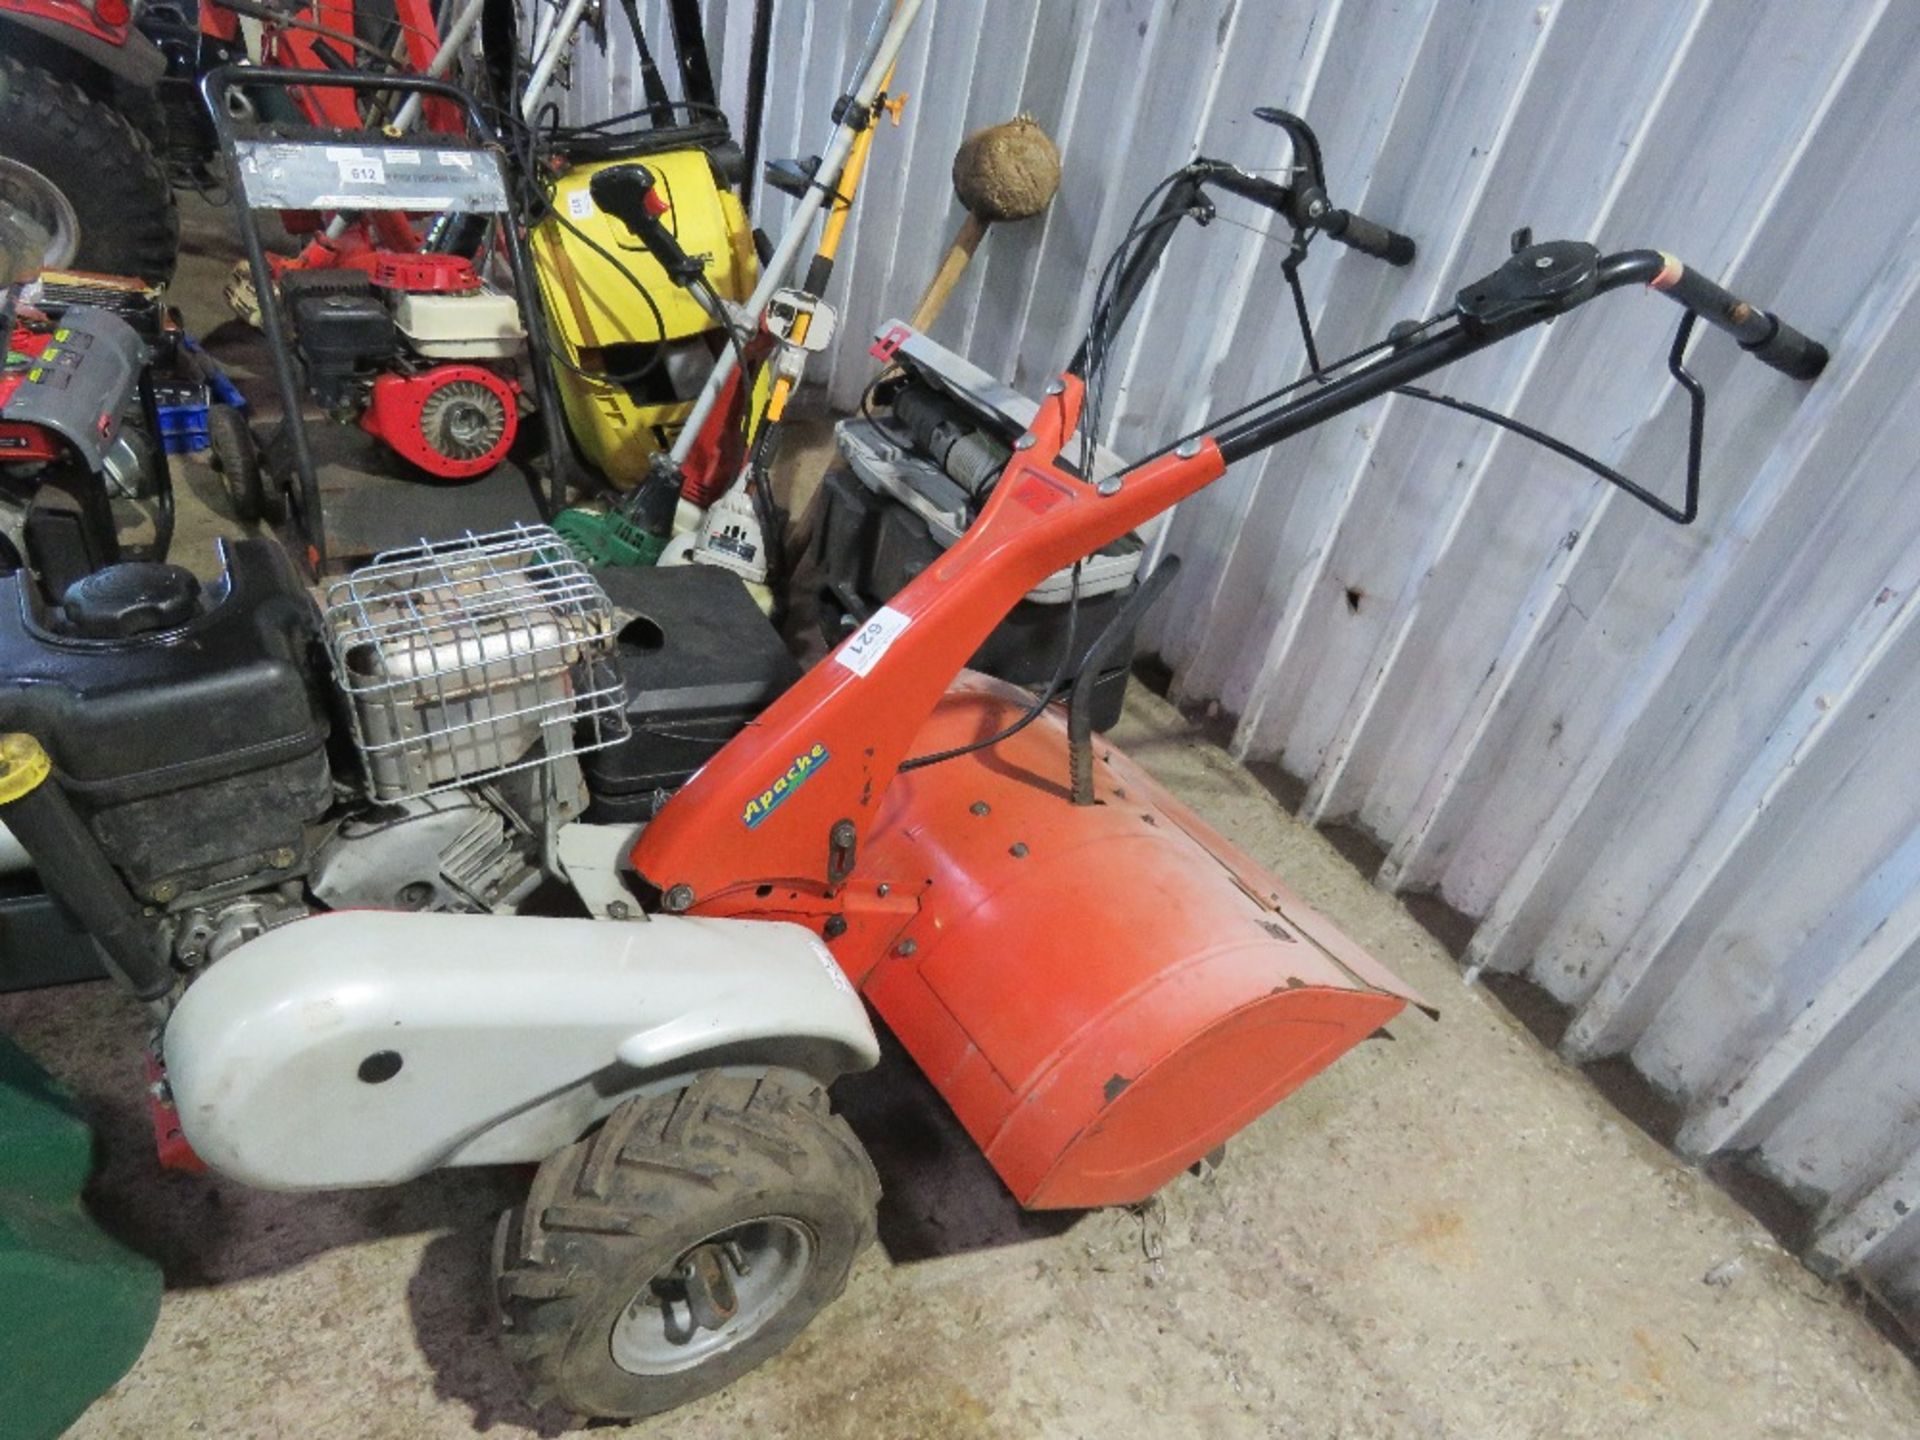 APACHE HEAVY DUTY PETROL ENGINED REAR TINE ROTORVATOR. THIS LOT IS SOLD UNDER THE AUCTIONEERS MA